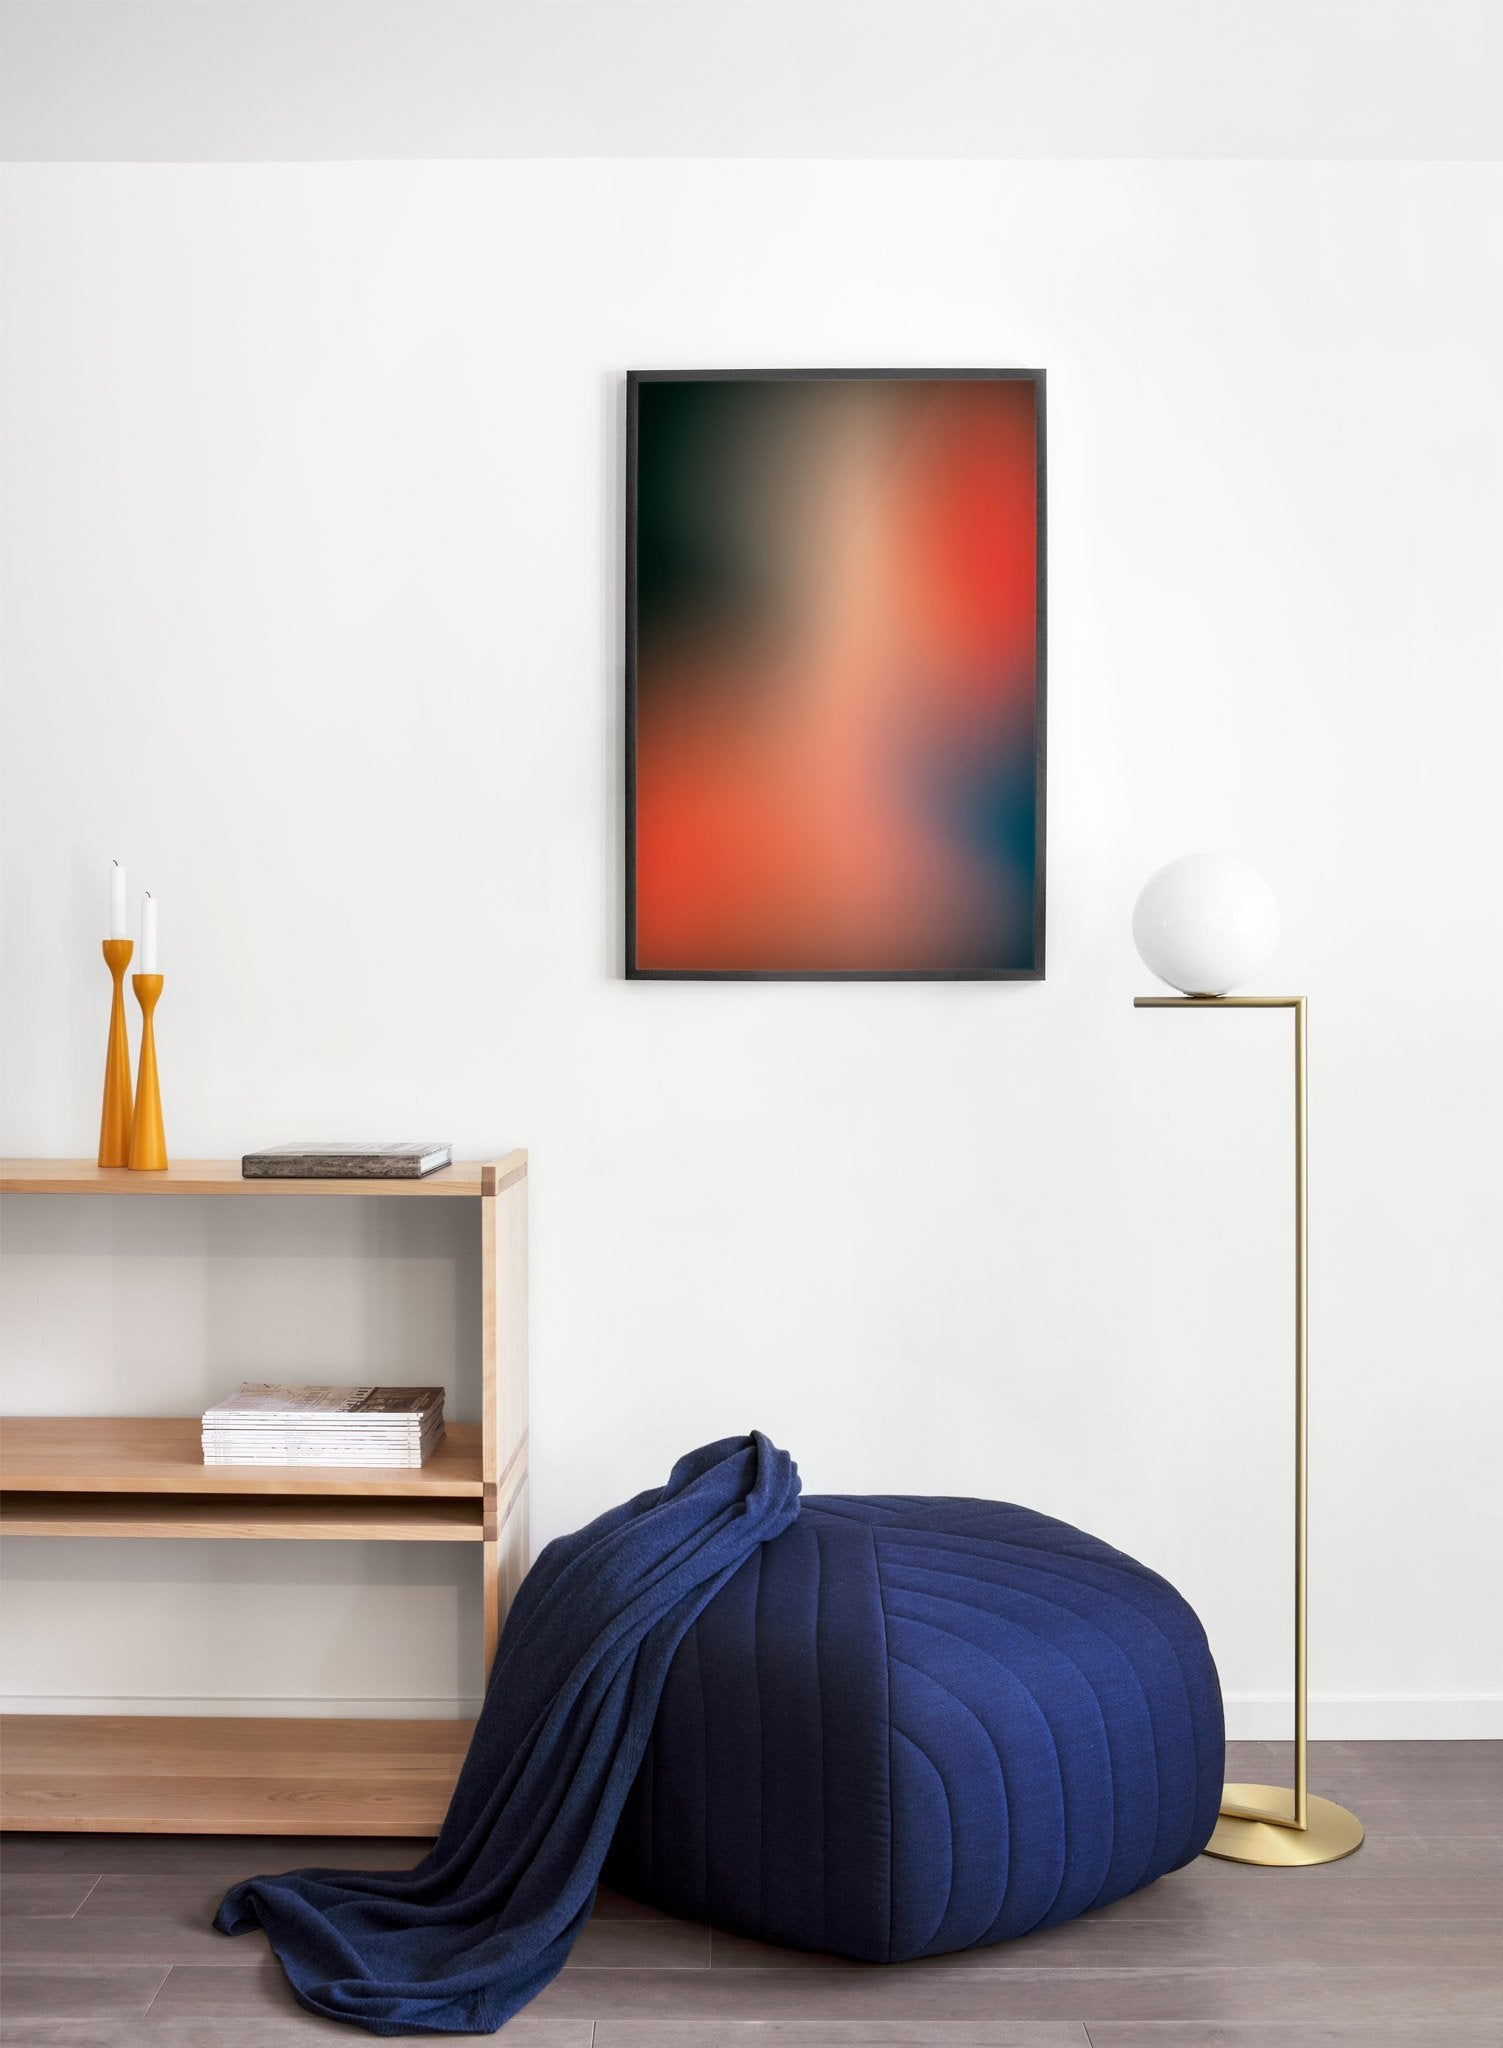 Realgar modern minimalist abstract design poster by Opposite Wall - Living room